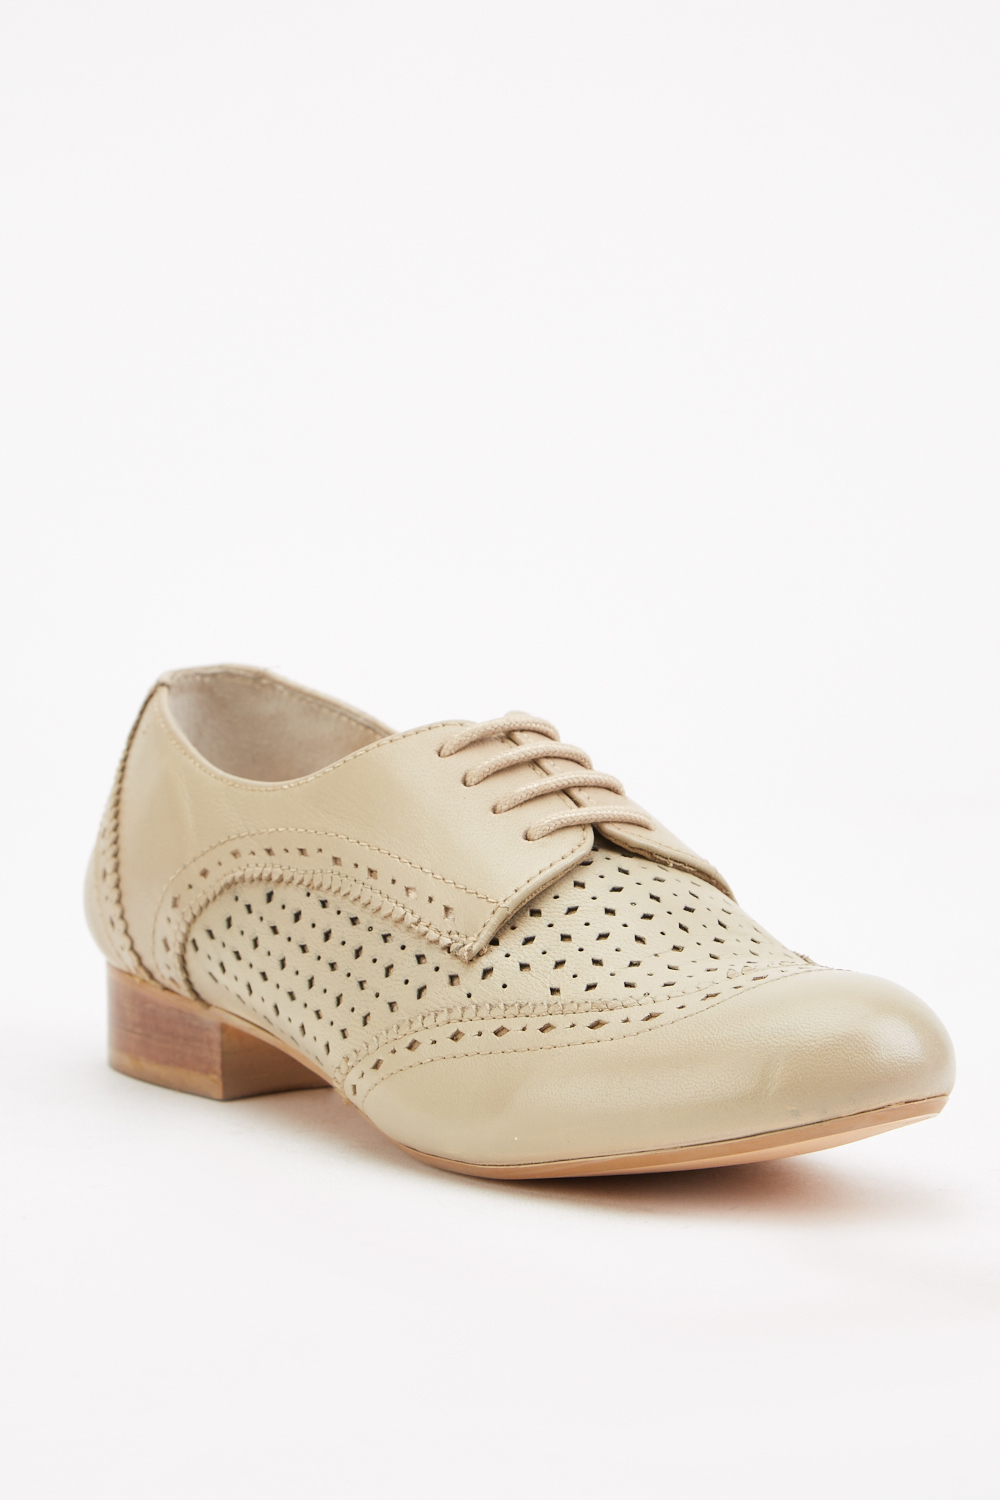 Laser Cut Lace Up Oxford Shoes - Just $7